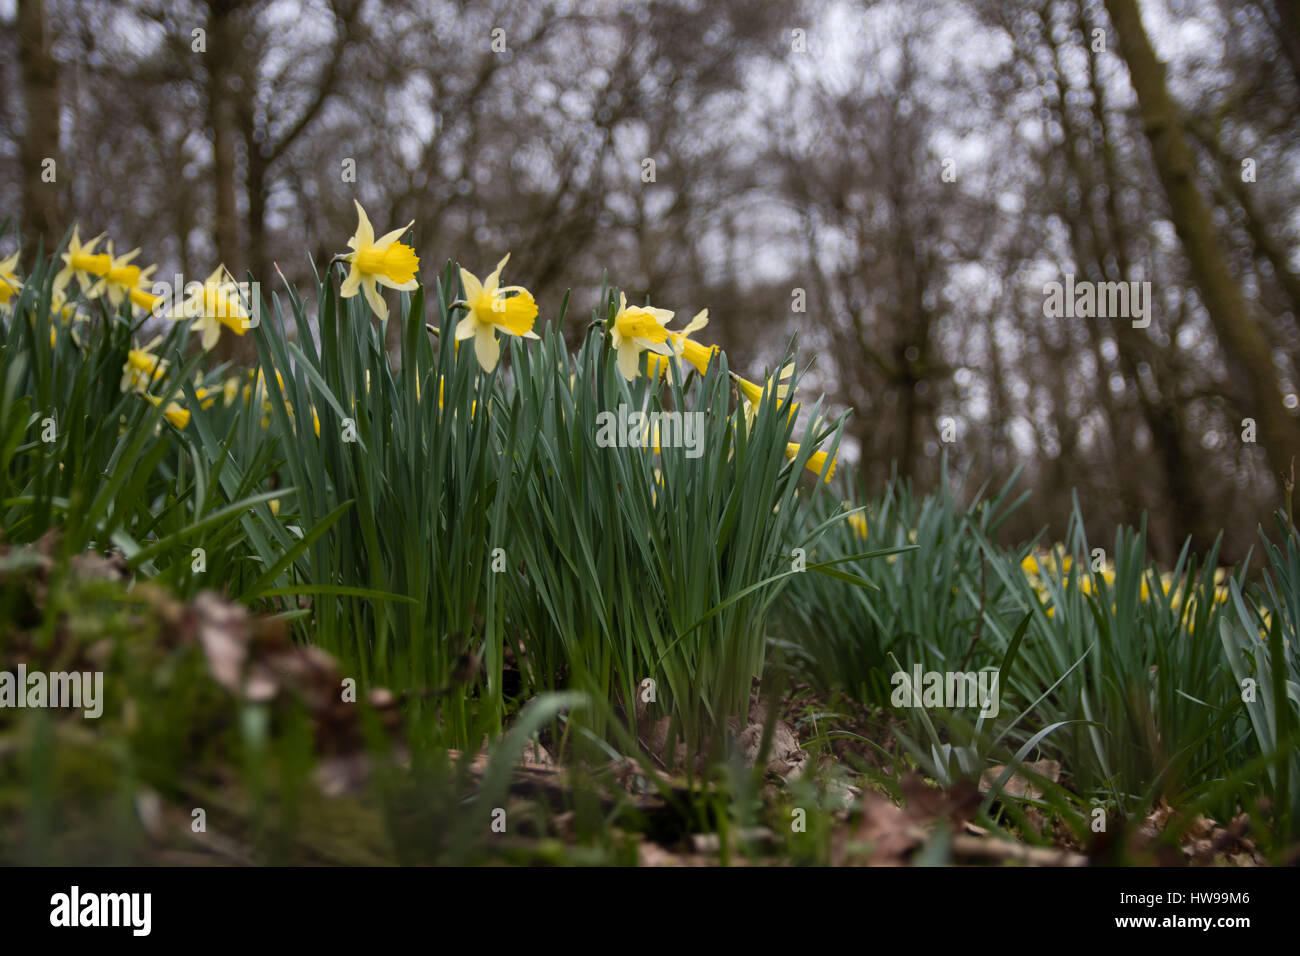 Flowering wild daffodils (Narcissus pseudonarcissus pseudonarcissus). Native daffodil, aka lent lily, in flower in Oyster's Coppice woodland, UK Stock Photo